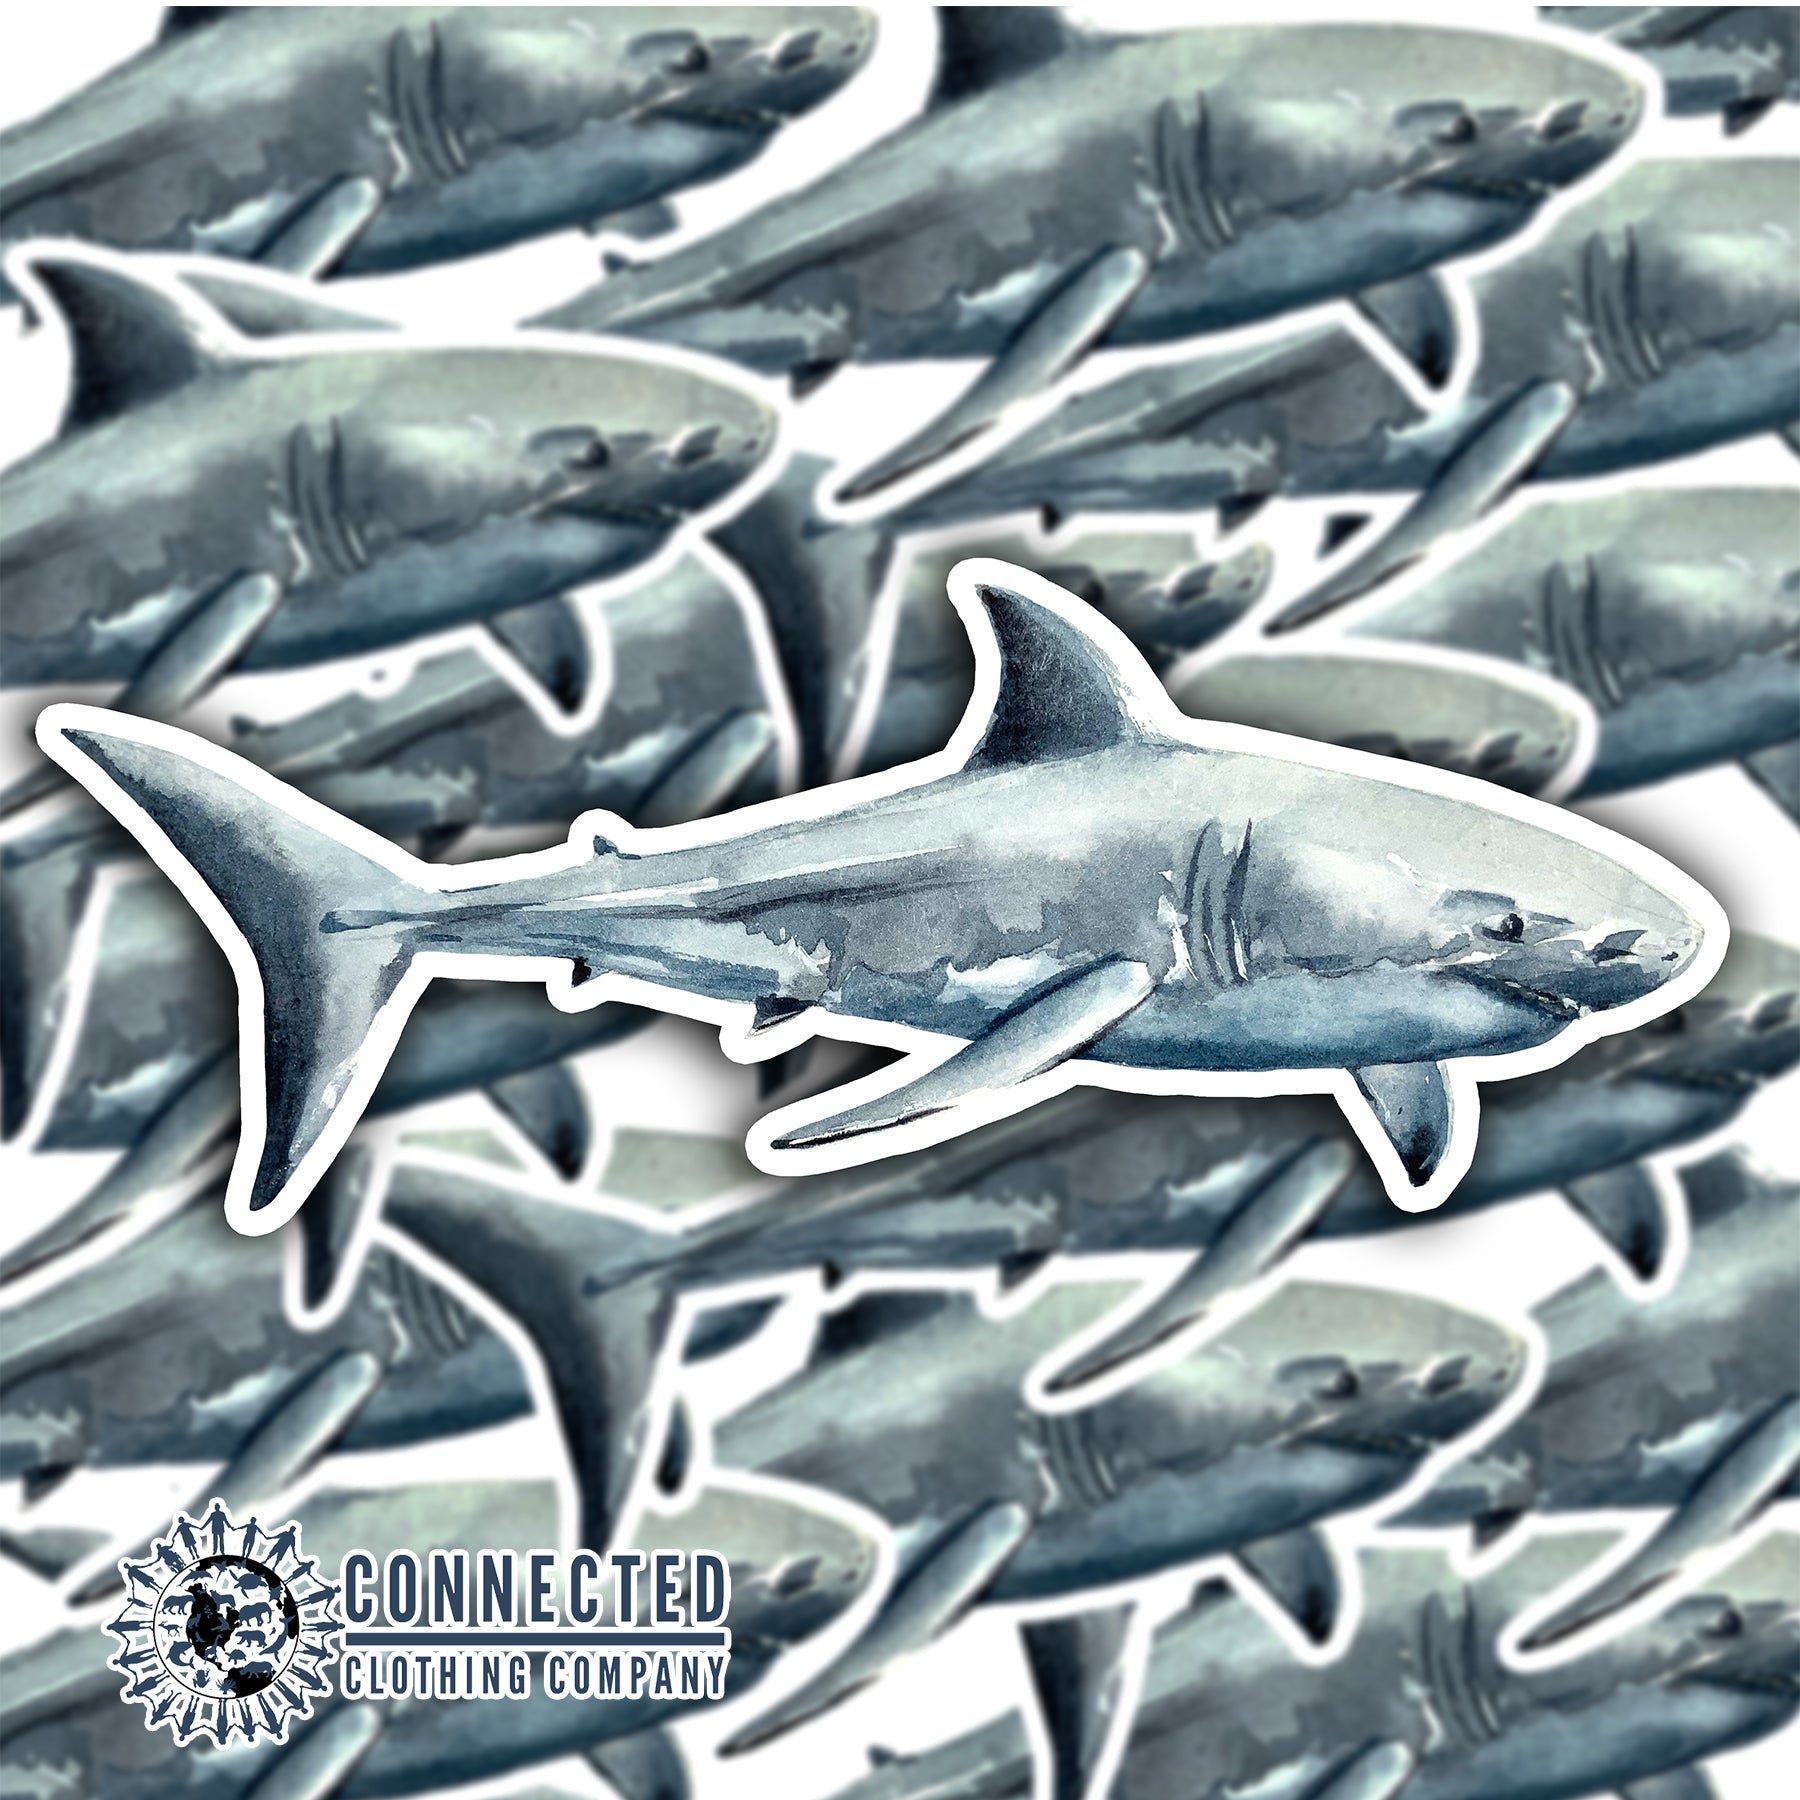 Closeup of Great White Shark Watercolor Sticker - Connected Clothing Company - Ethical and Sustainable Apparel - portion of profits donated to shark conservation